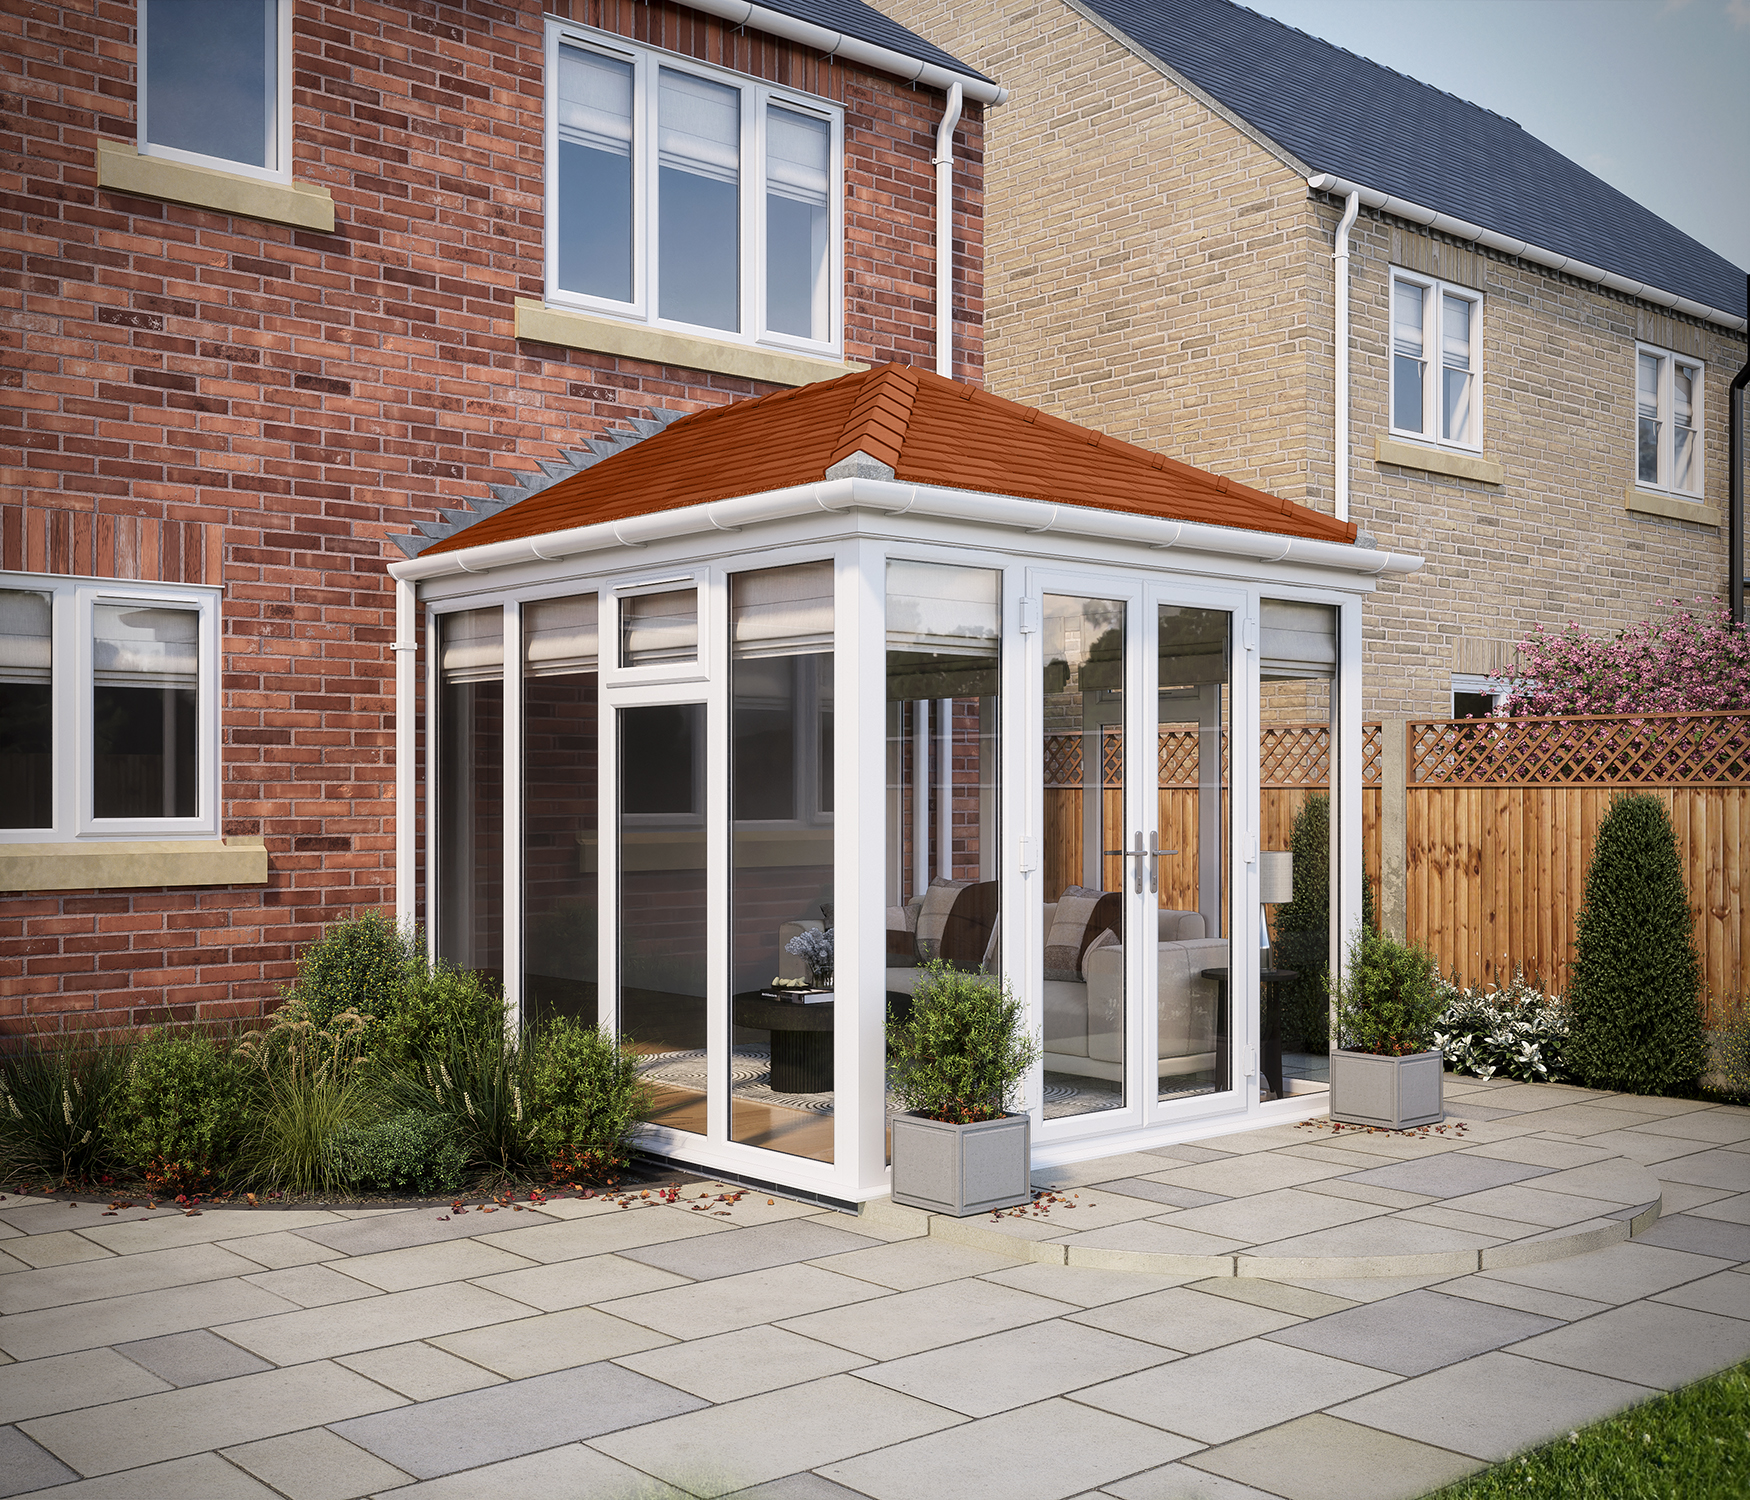 SOLid roof Full Height Edwardian Conservatory White Frames with Rustic Terracotta Tiles